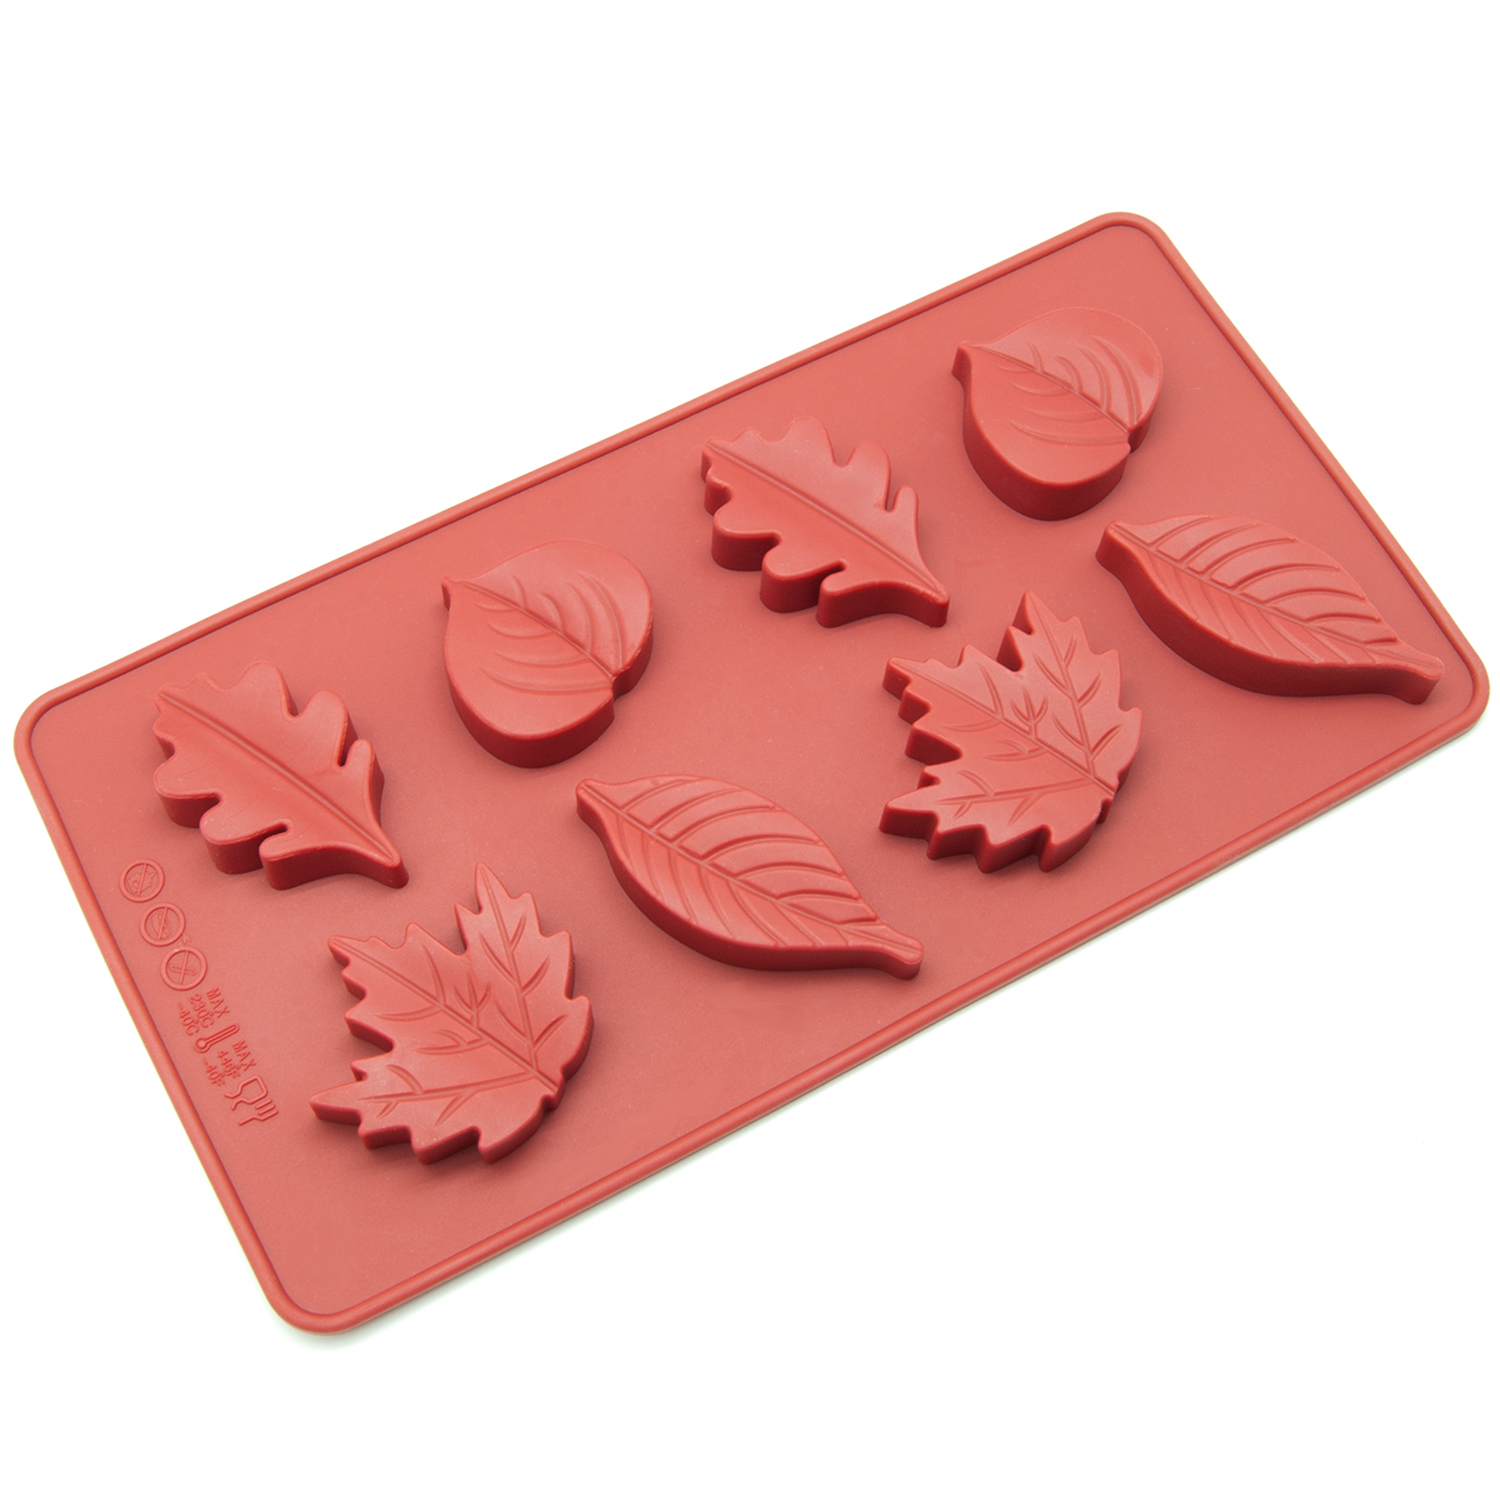 Freshware Silicone Mold, Chocolate Mold, Candy Mold, Ice Mold, Soap Mold for Chocolate, Candy and Gummy, Maple Leaves, 8-Cavity